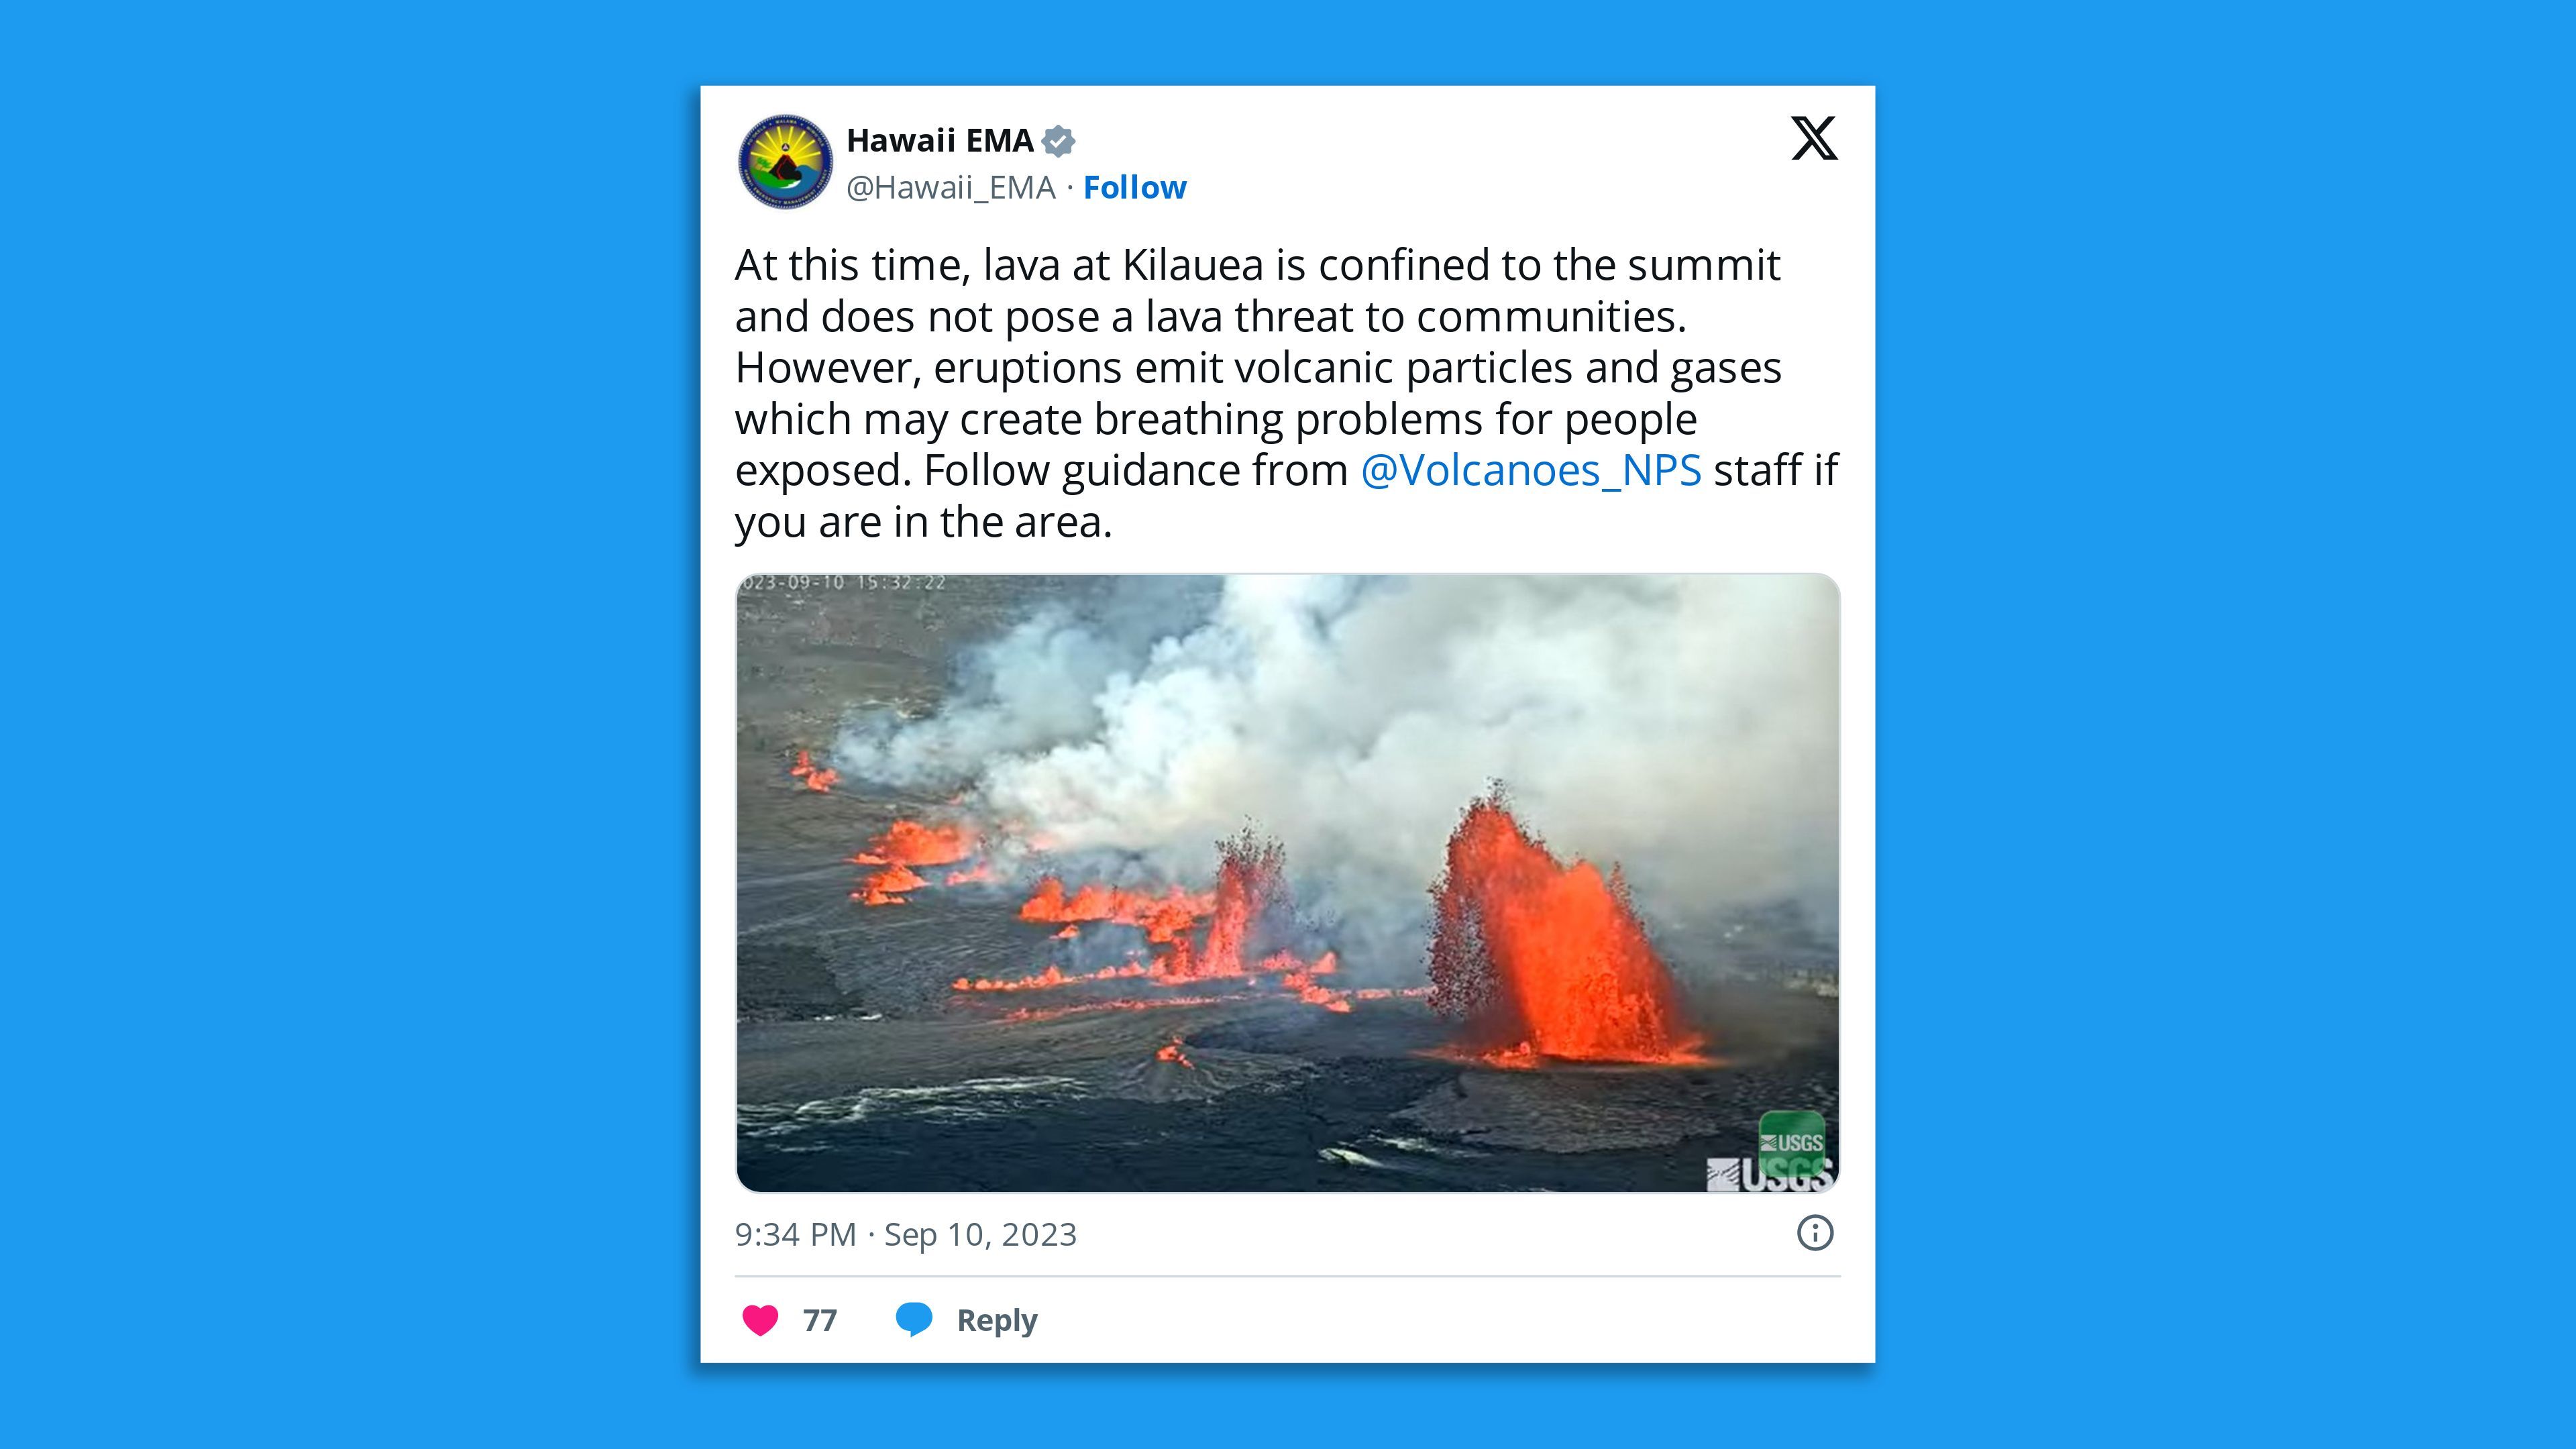 A screenshot of a Hawaii Emergency Management Agency tweet showing a screenshot of Kilauea Volcano erupting with the comment: "At this time, lava at Kilauea is confined to the summit and does not pose a lava threat to communities. However, eruptions emit volcanic particles and gases which may create breathing problems for people exposed. Follow guidance from  @Volcanoes_NPS  staff if you are in the area."